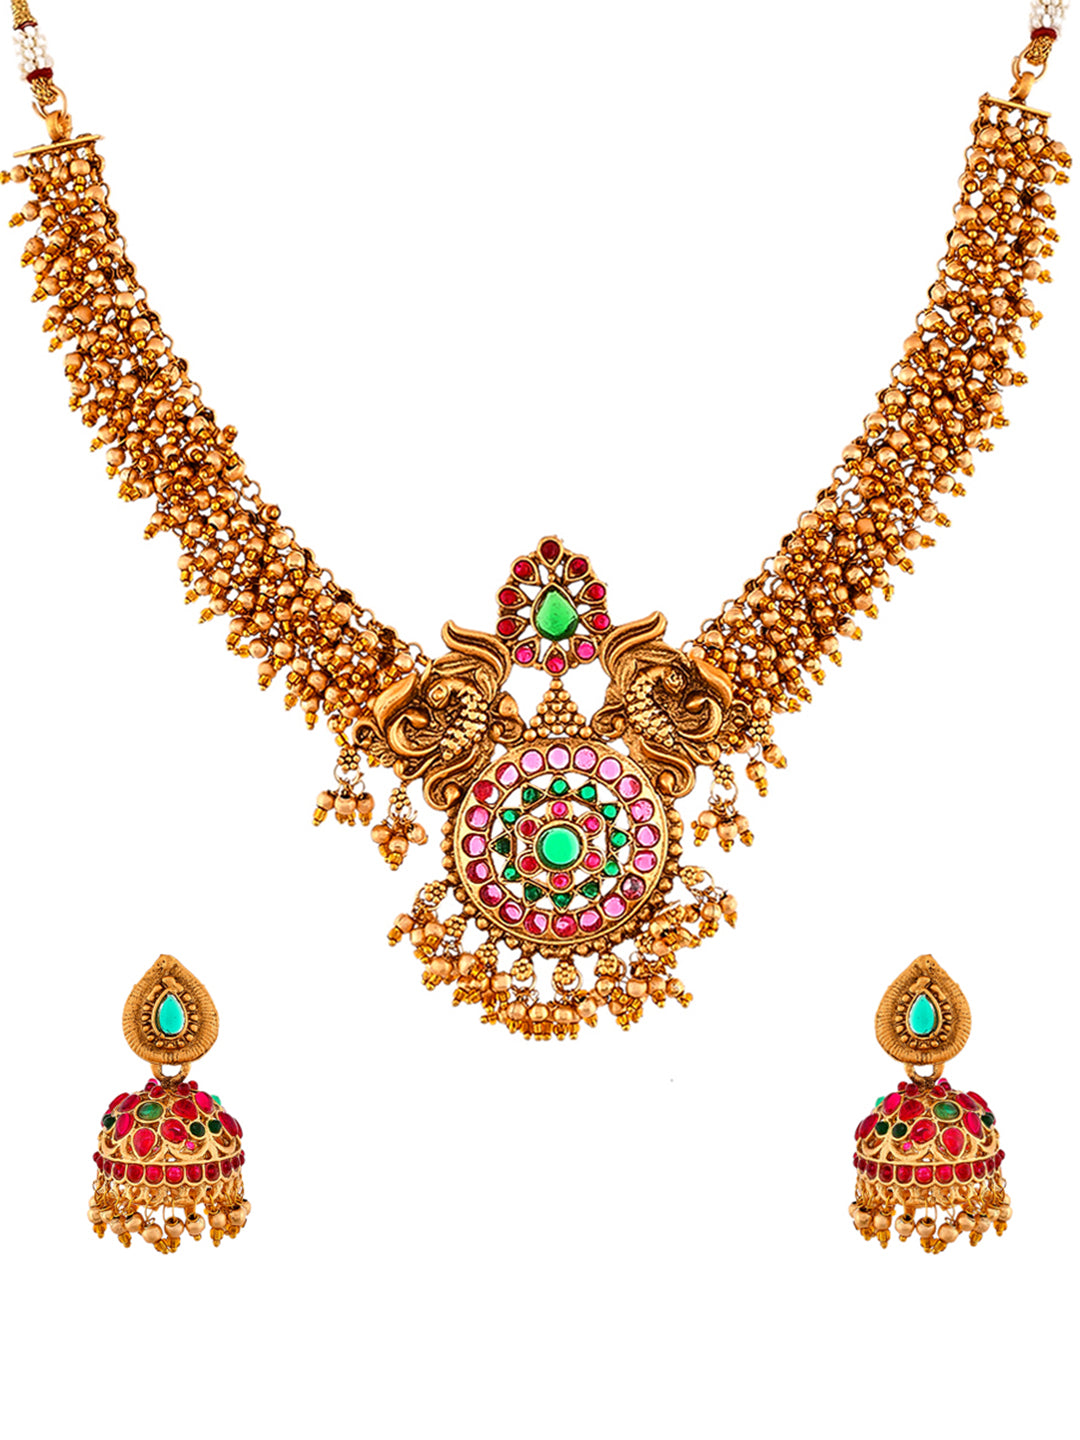 Top 9 South Indian Wedding Jewellery Trends - Jewellery Designs | Indian  wedding jewelry, Diamond wedding jewelry, Indian jewellery design